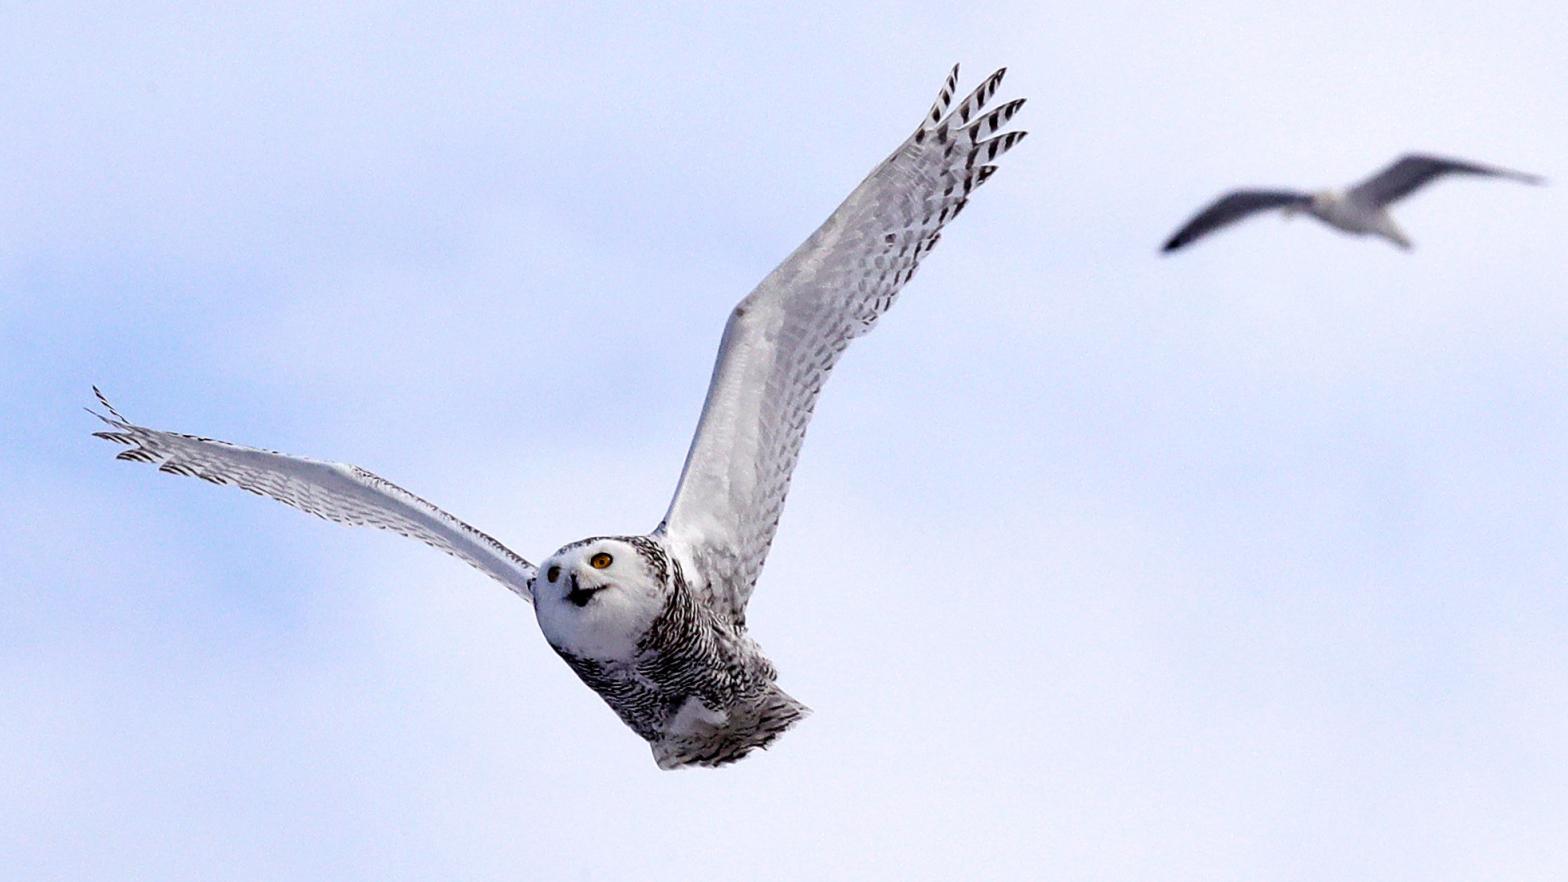 In this Dec. 14, 2017 photo, a snowy owl flies past a seagull after being released along the shore of Duxbury Beach in Duxbury, Massaschusetts. (Photo: Charles Krupa, AP)